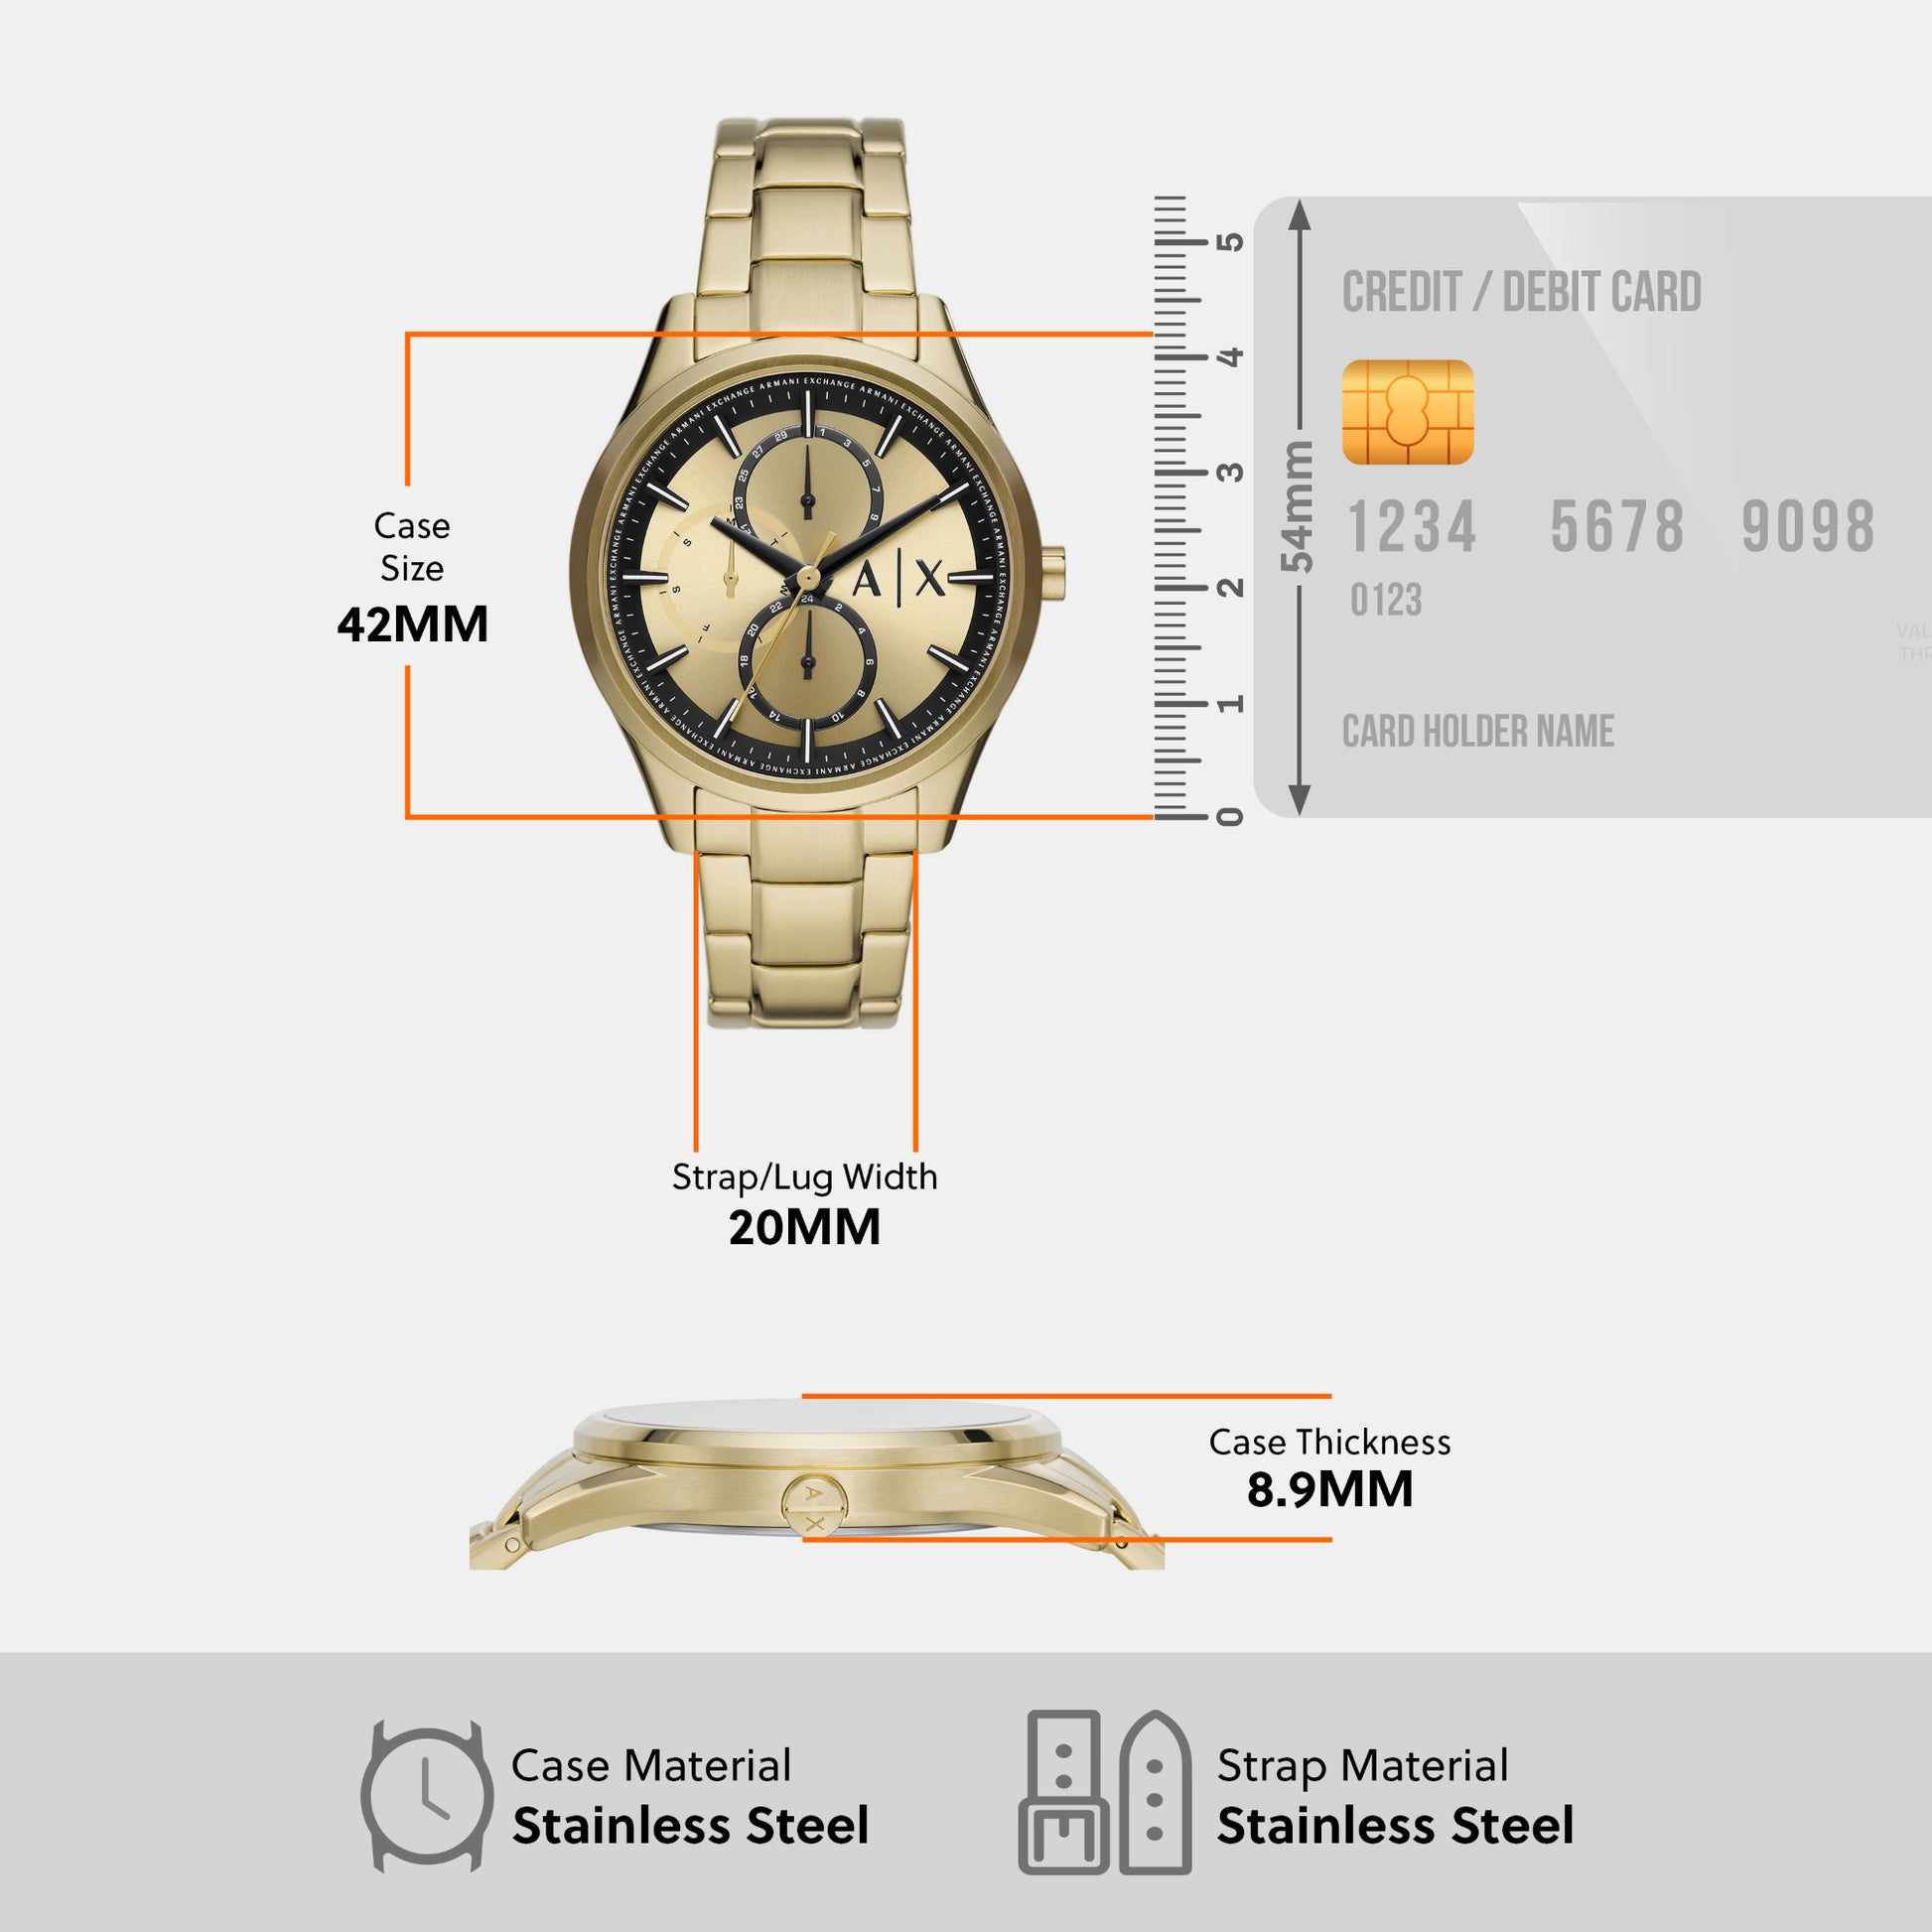 Gold Watch – Just Chronograph In Time Stainless Male AX1866 Steel